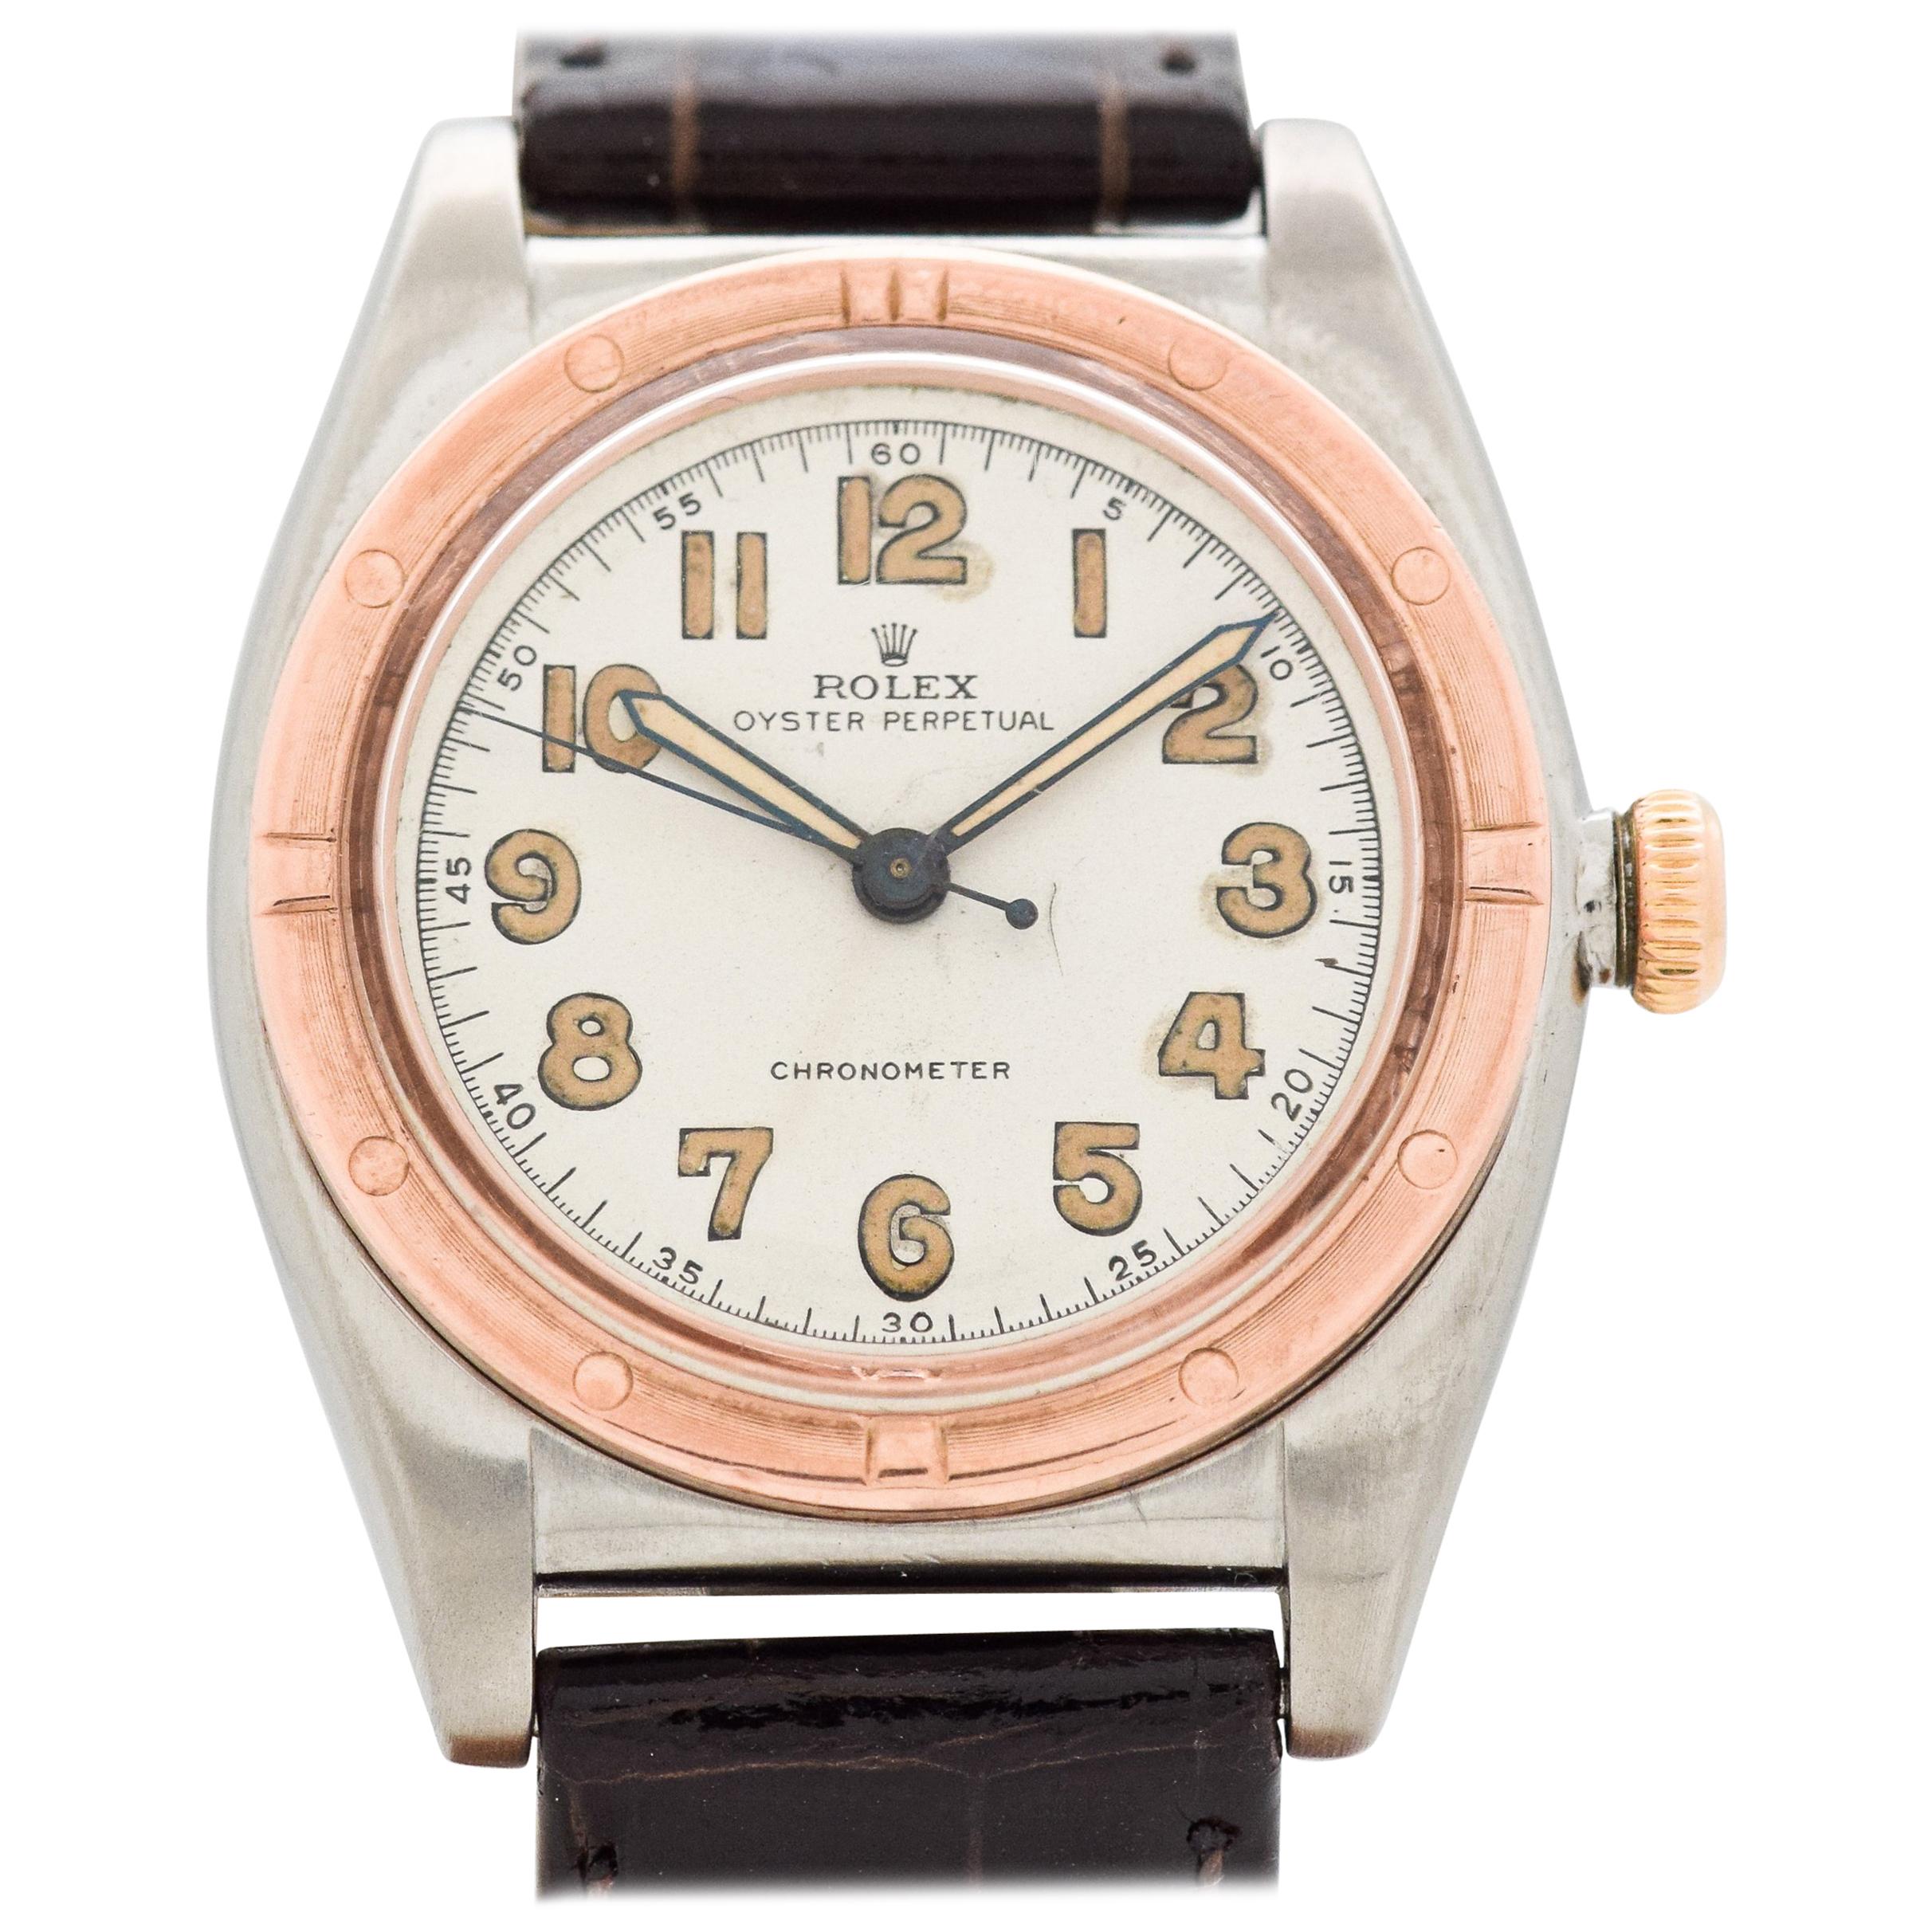 Vintage Rolex Bubbleback Reference 3372 Rose Gold and Stainless Steel Watch 1944